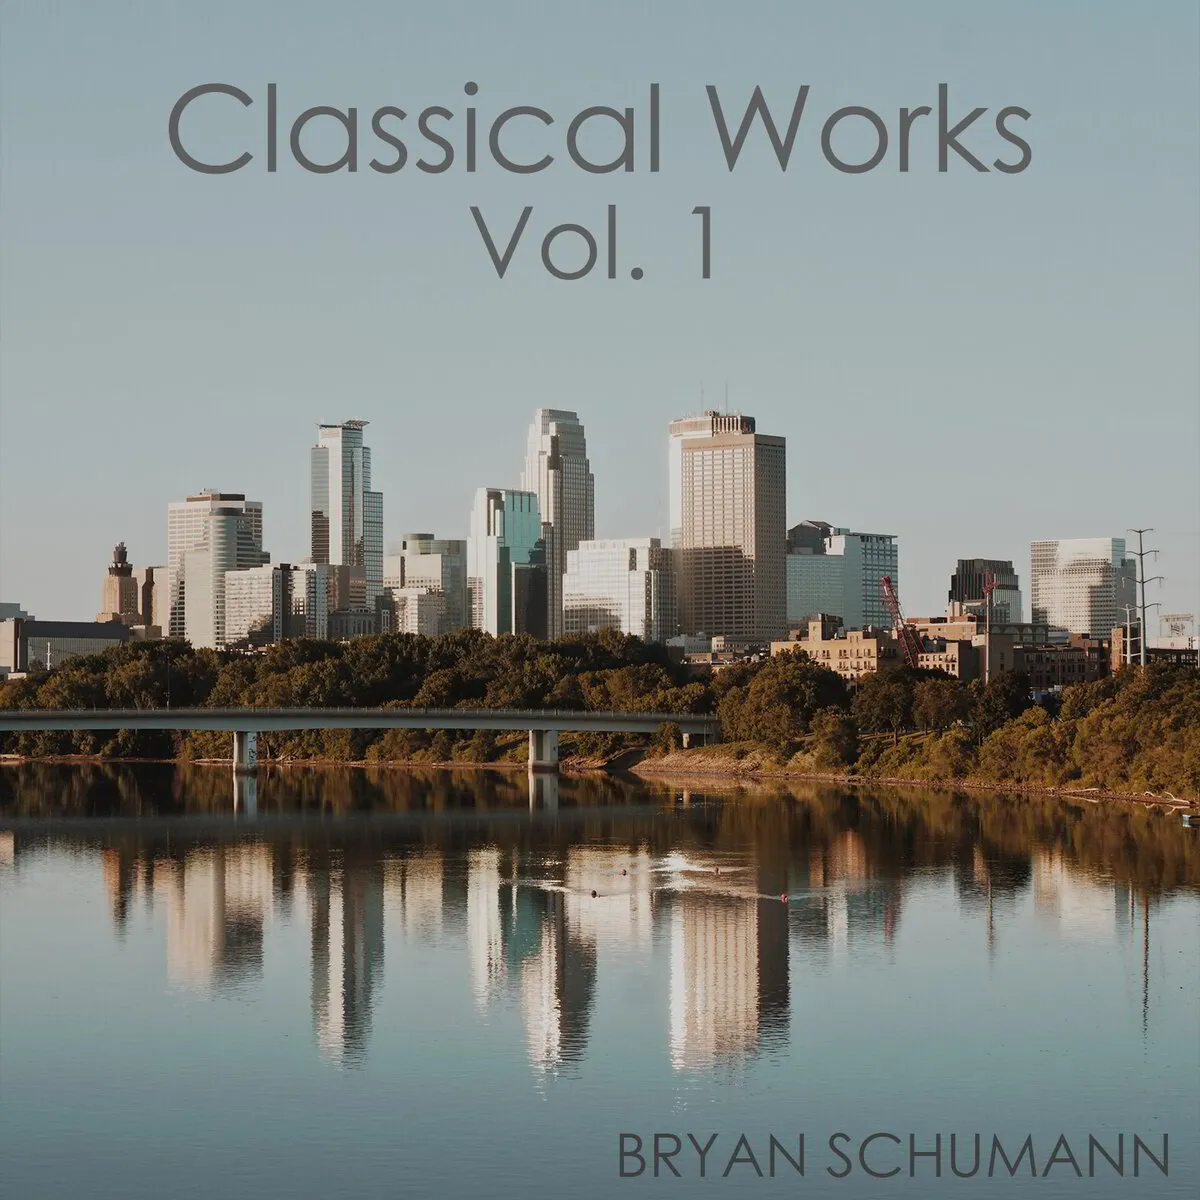 Classical Works, Vol. 1 (audio download)